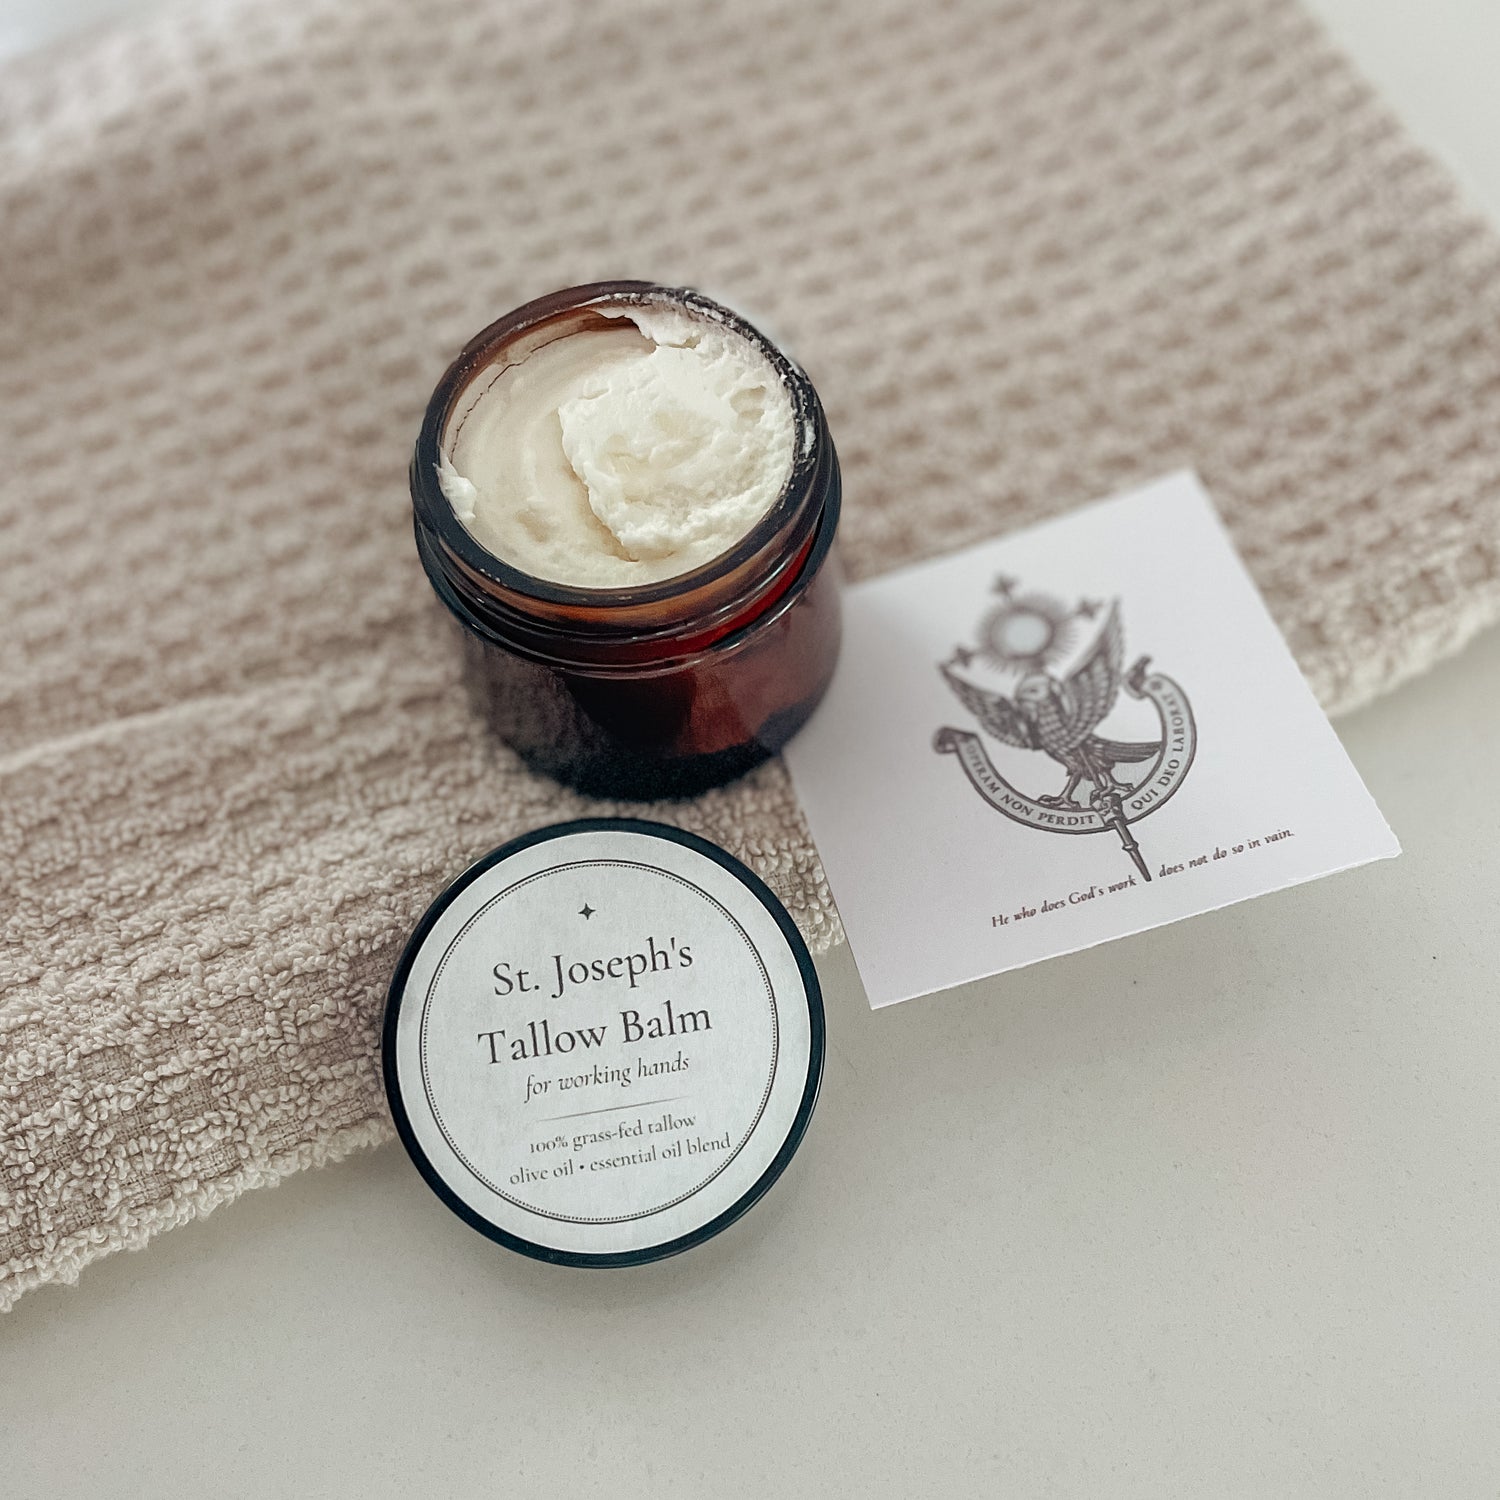 St. Joseph’s Whipped Tallow Balm for Working Hands